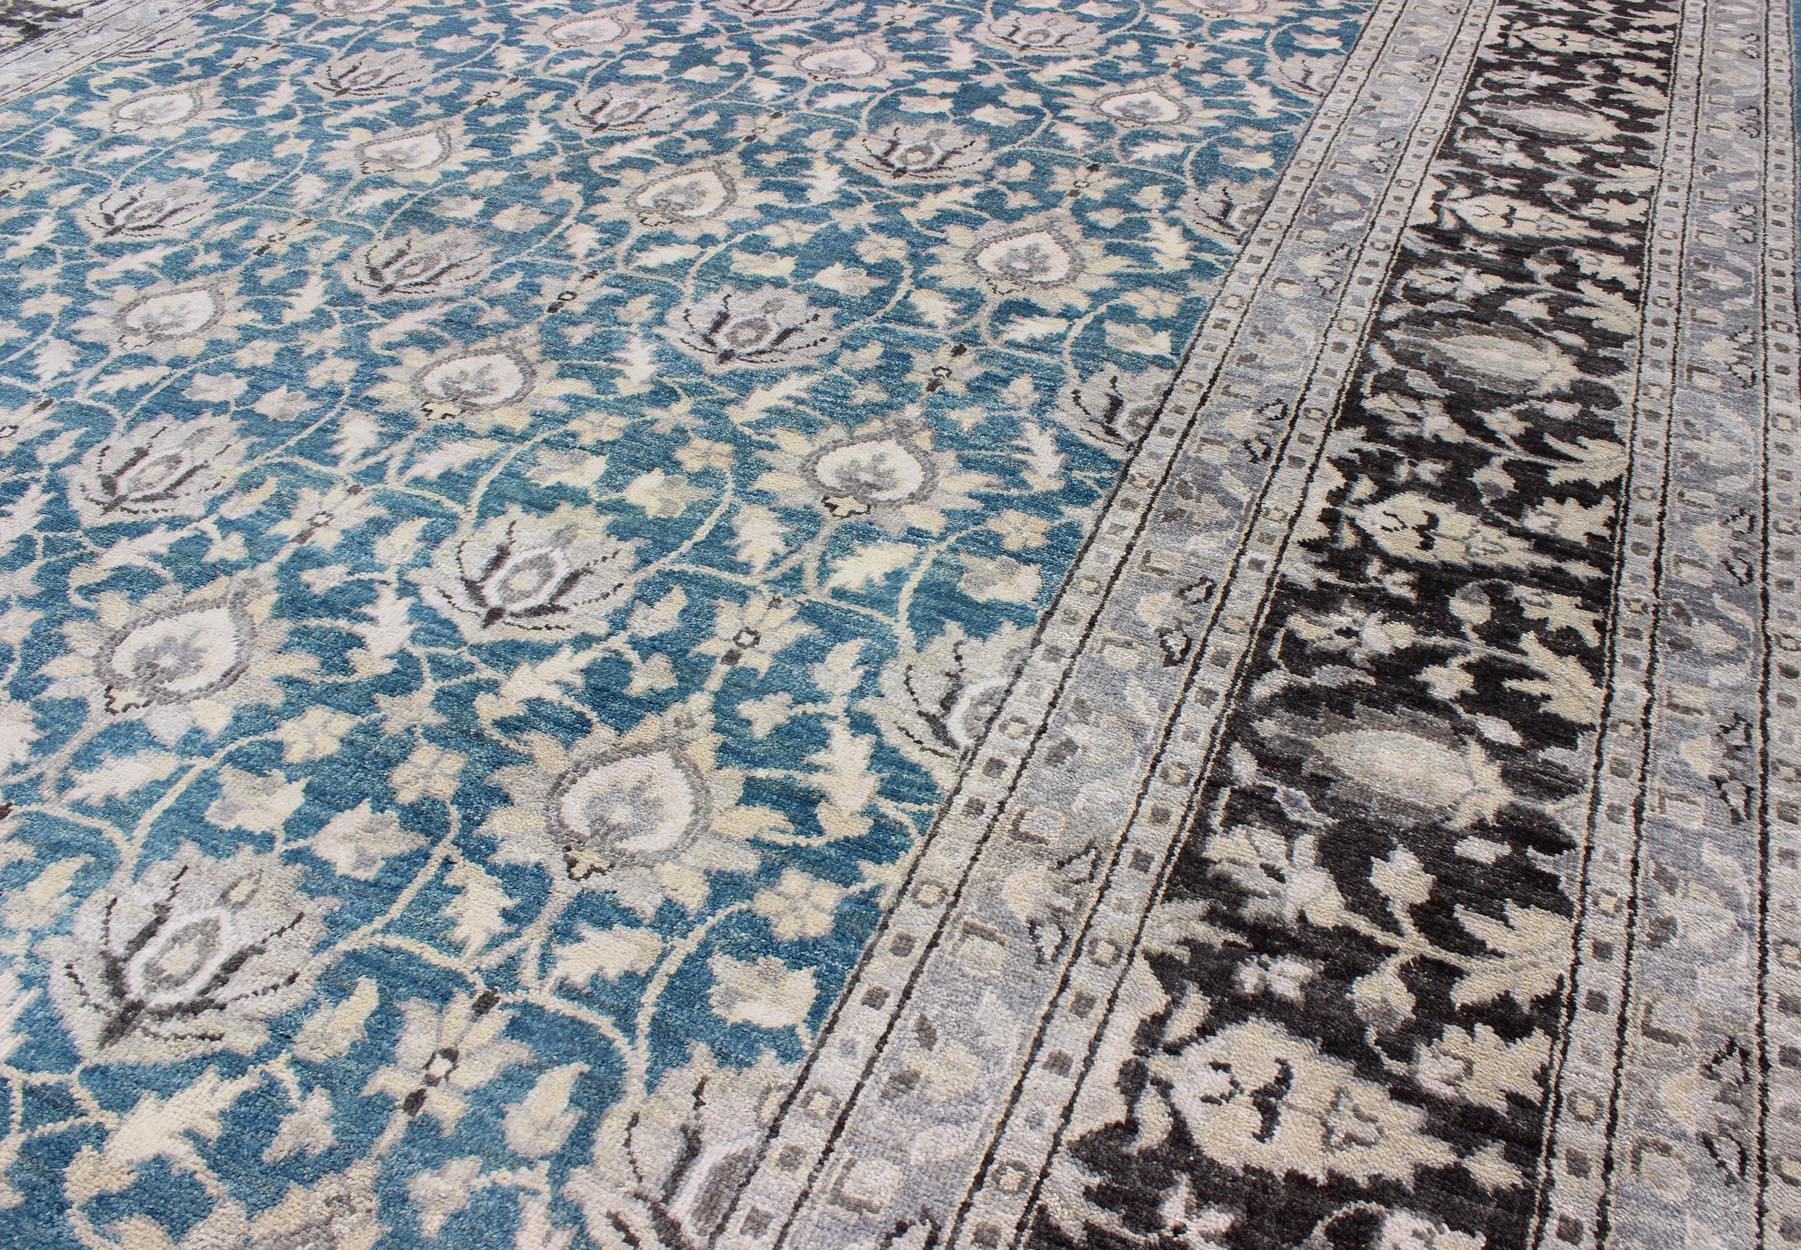 Large Modern Tabriz Rug in Wool With All-Over Design in Blue, Gray and Charcoal by Keivan Woven Arts.
Measures: 10'0 x 14'0 
This hand knotted Tabriz rug features a beautiful all-over design rendered in grays, silver, and charcoal and blue tones.